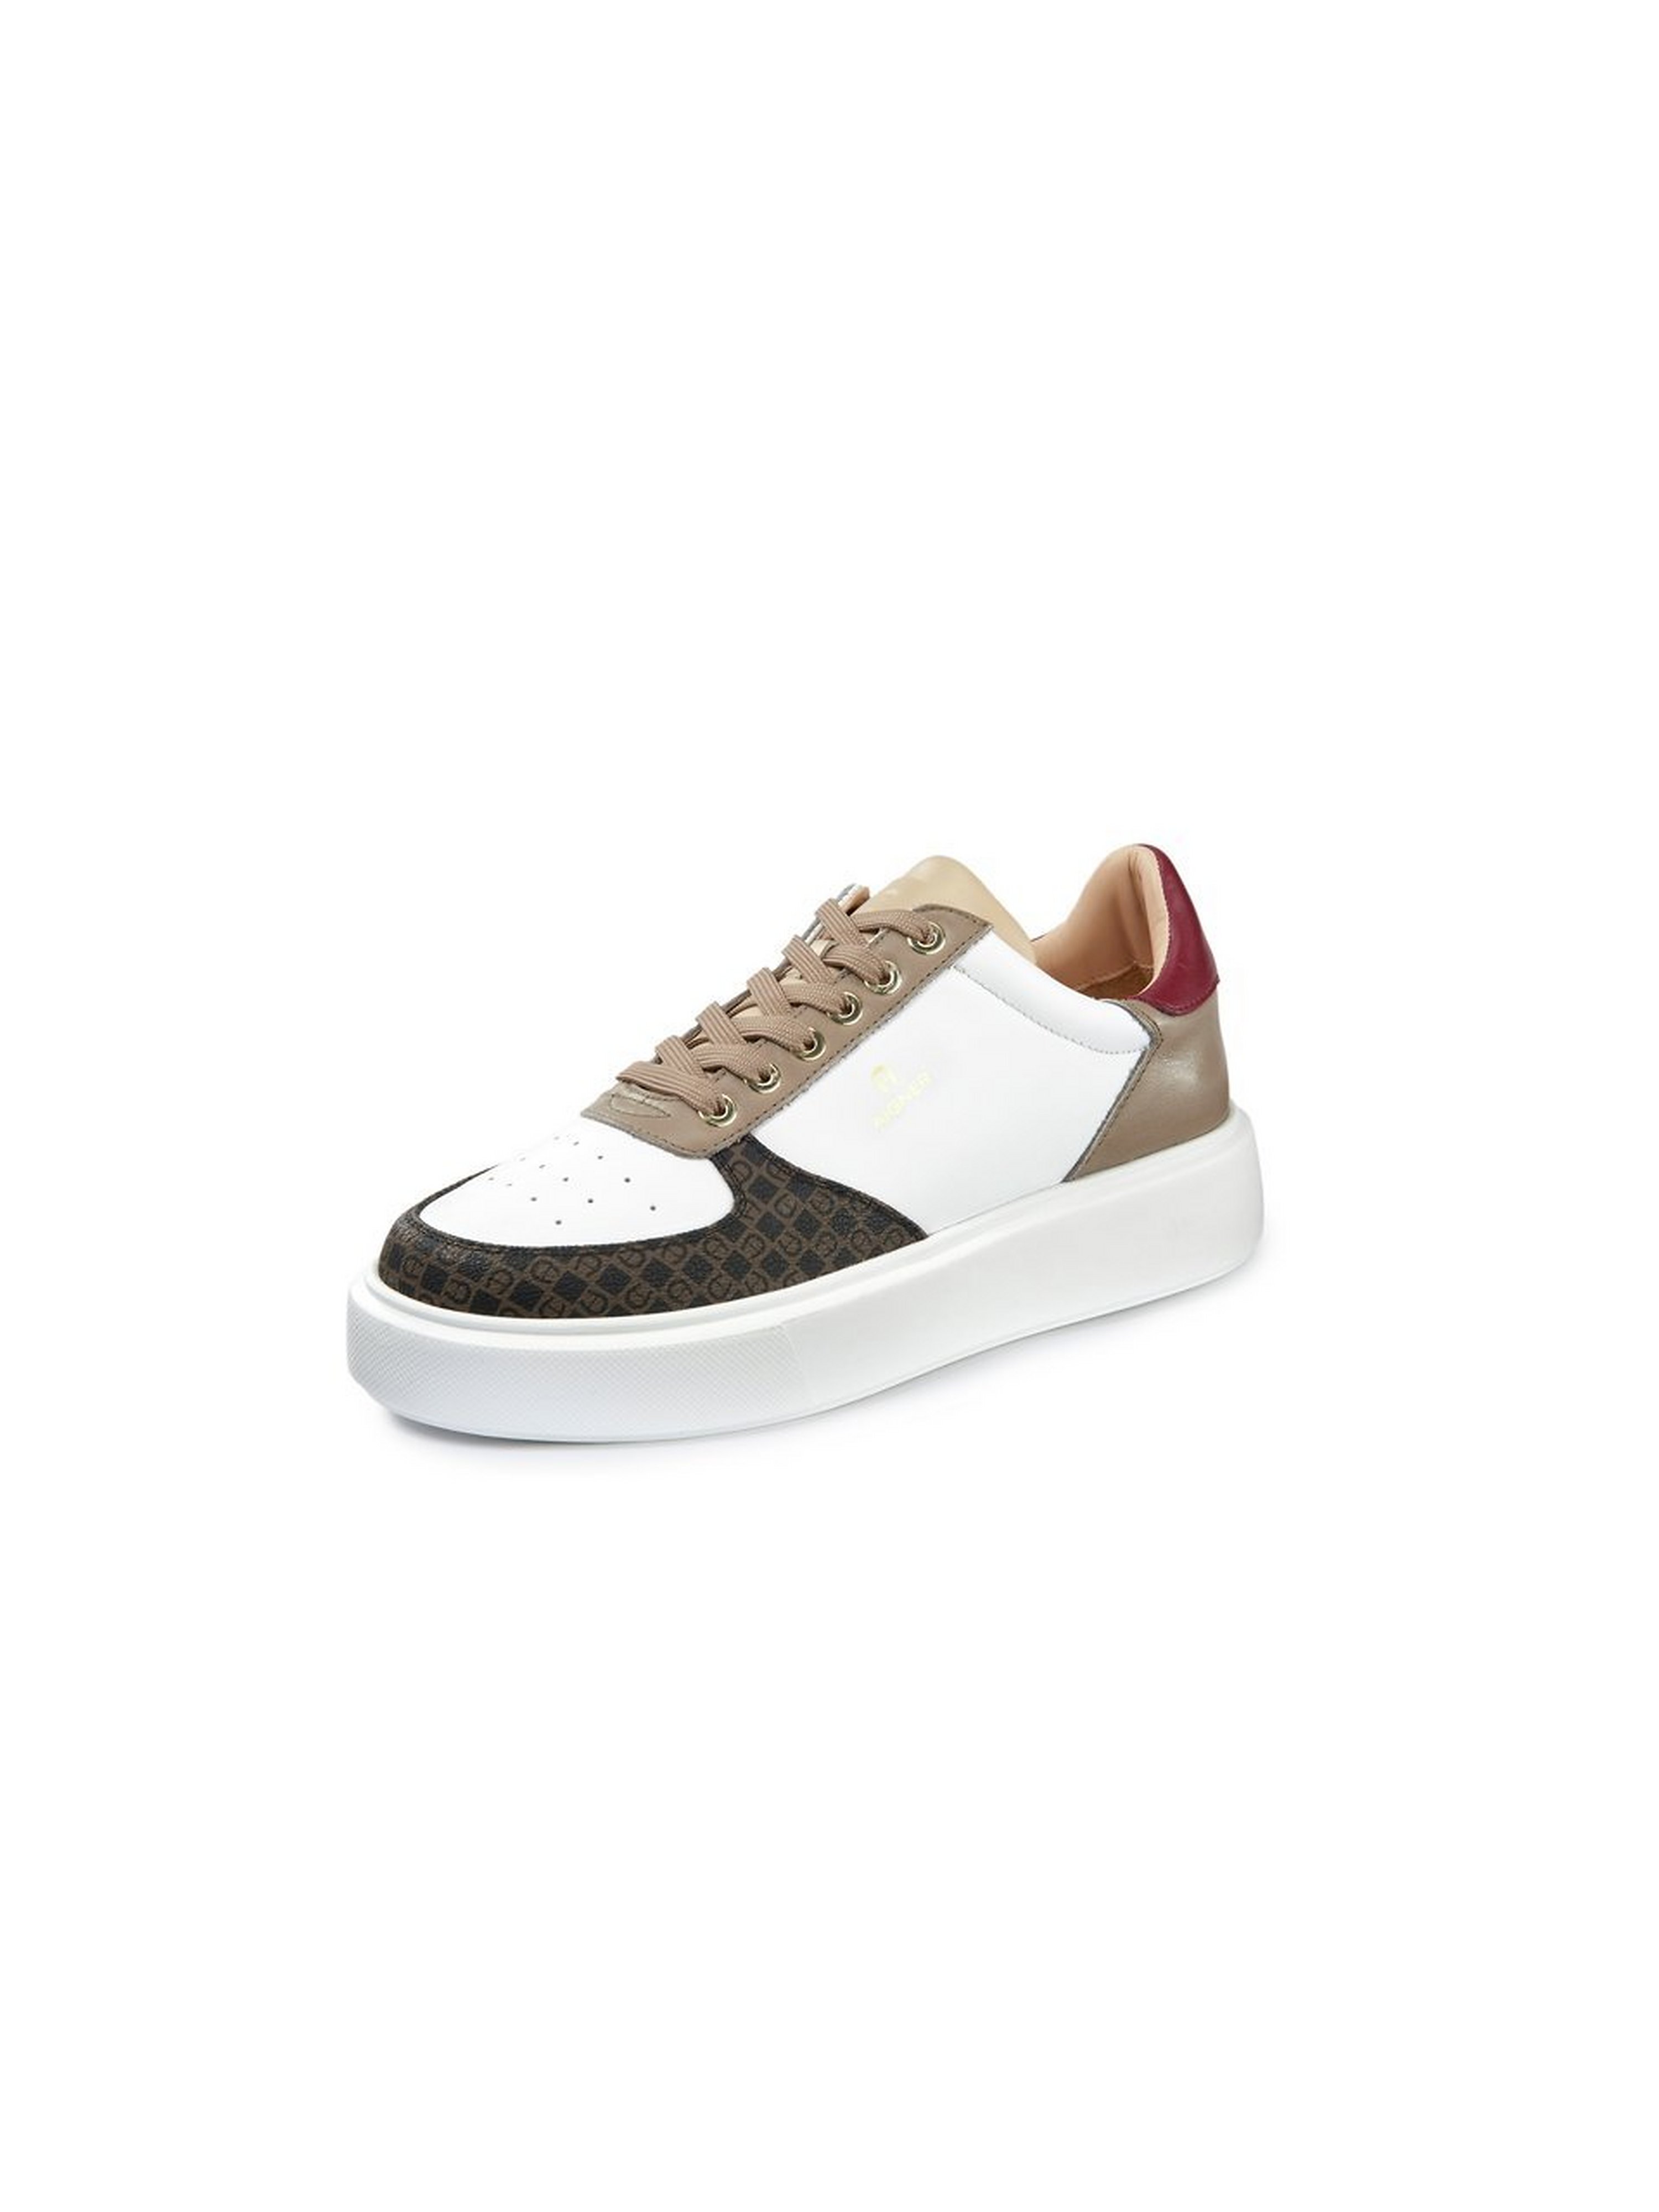 Les sneakers Sally cuir nappa vachette  Aigner blanc taille 36